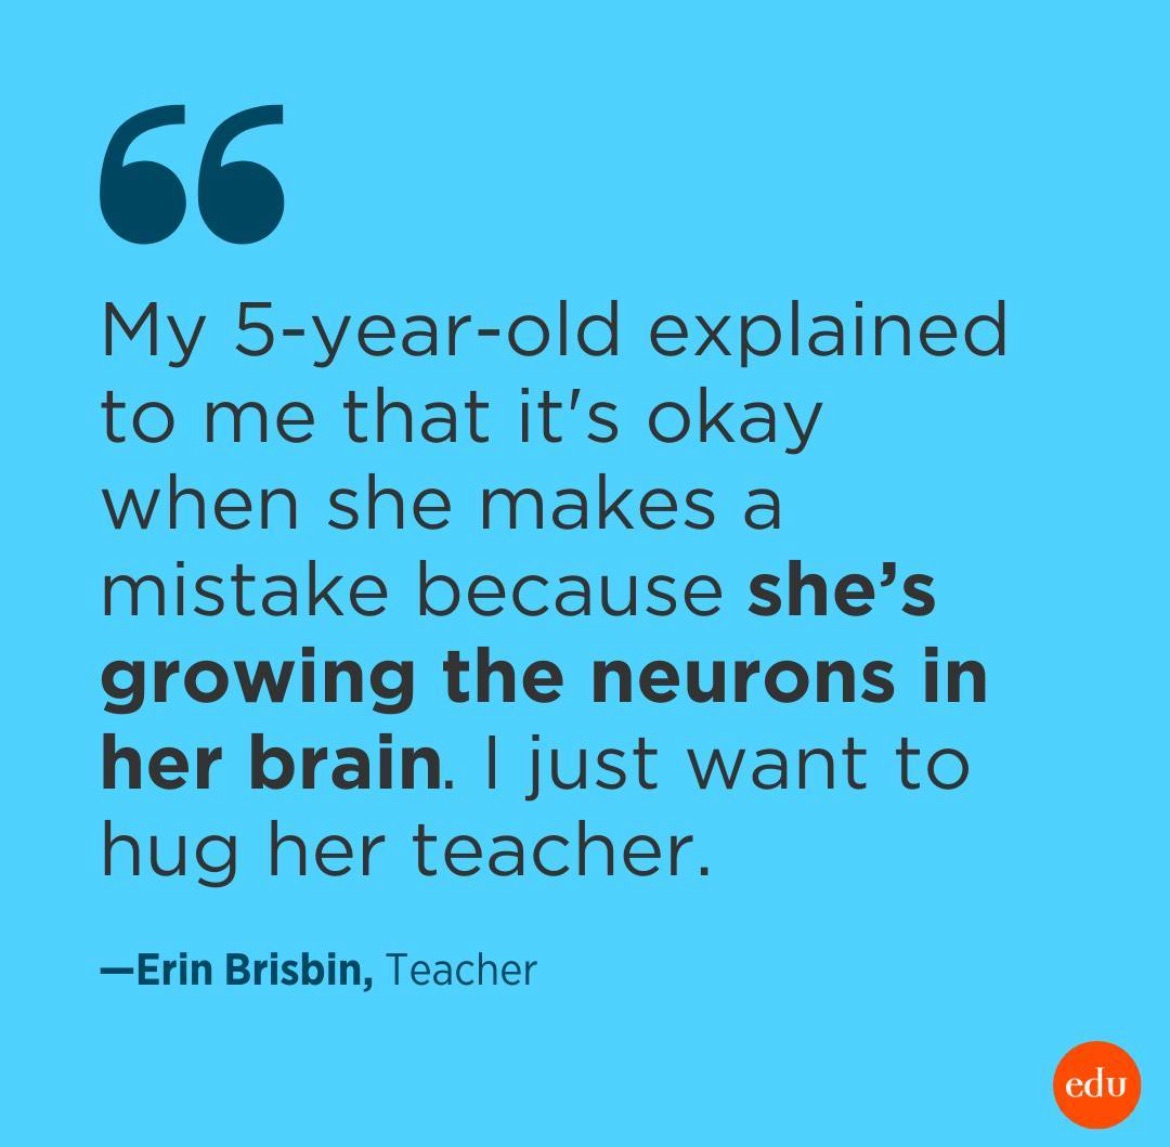 #mondaymotivation From @edutopia. Our work is so important! #scchat #mtss #makingmtsswork